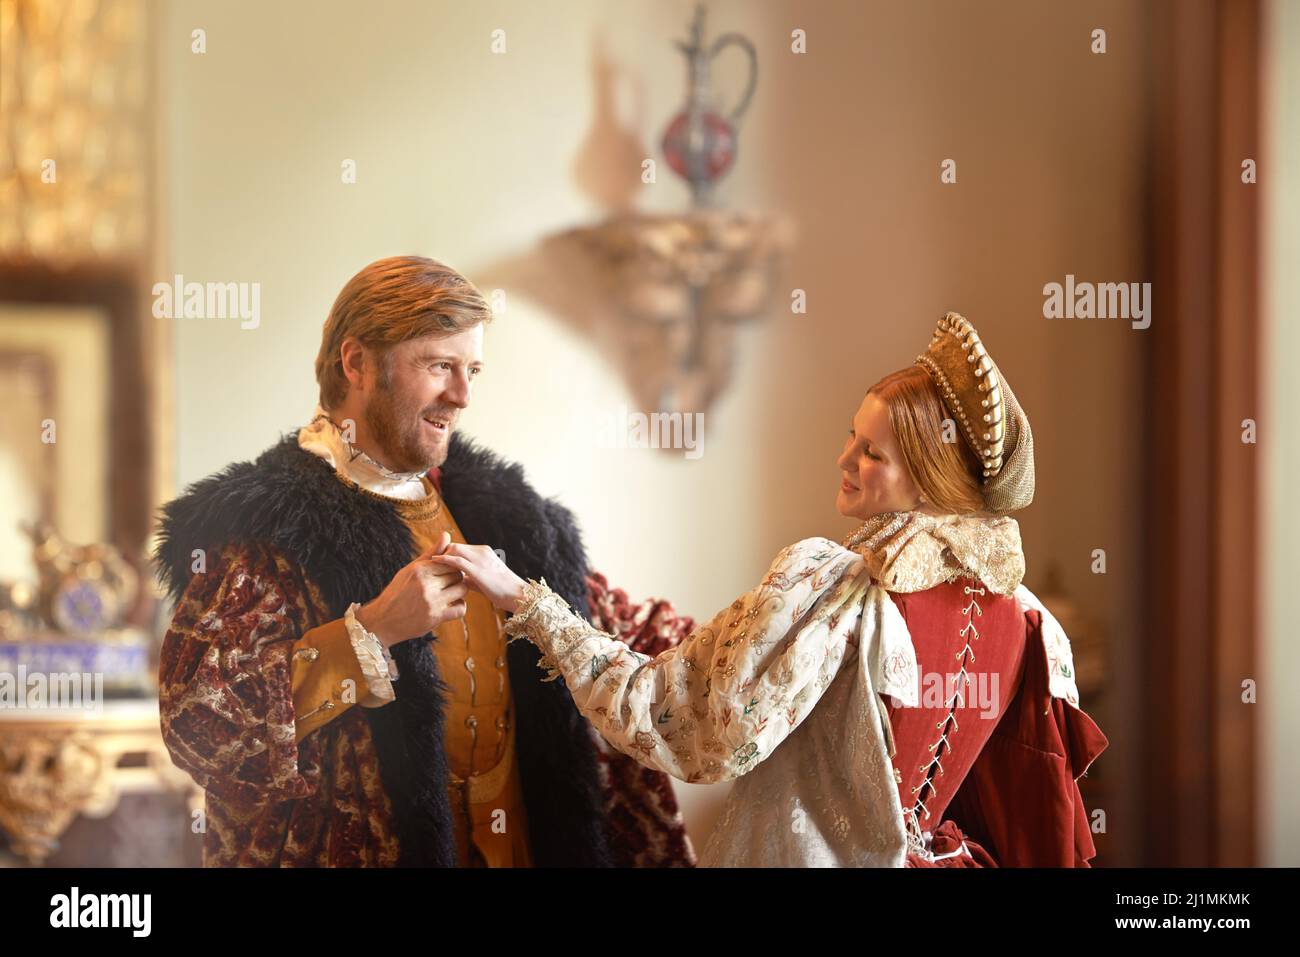 Dance Royale. A king and queen dancing together in their palace. Stock Photo